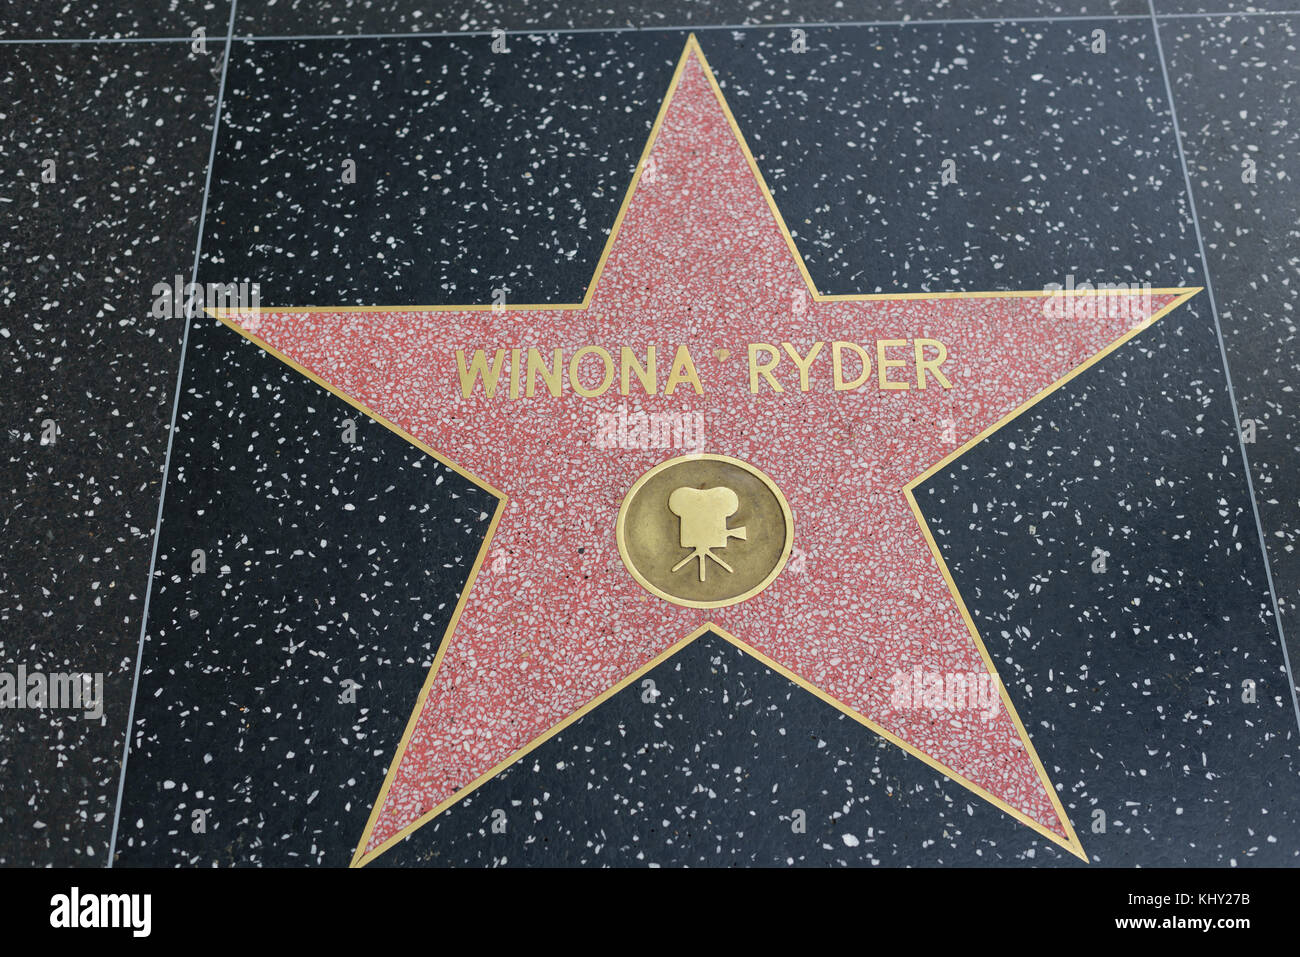 HOLLYWOOD, CA - DICEMBRE 06: Winona Ryder star sulla Hollywood Walk of Fame a Hollywood, California il 6 dicembre 2016. Foto Stock